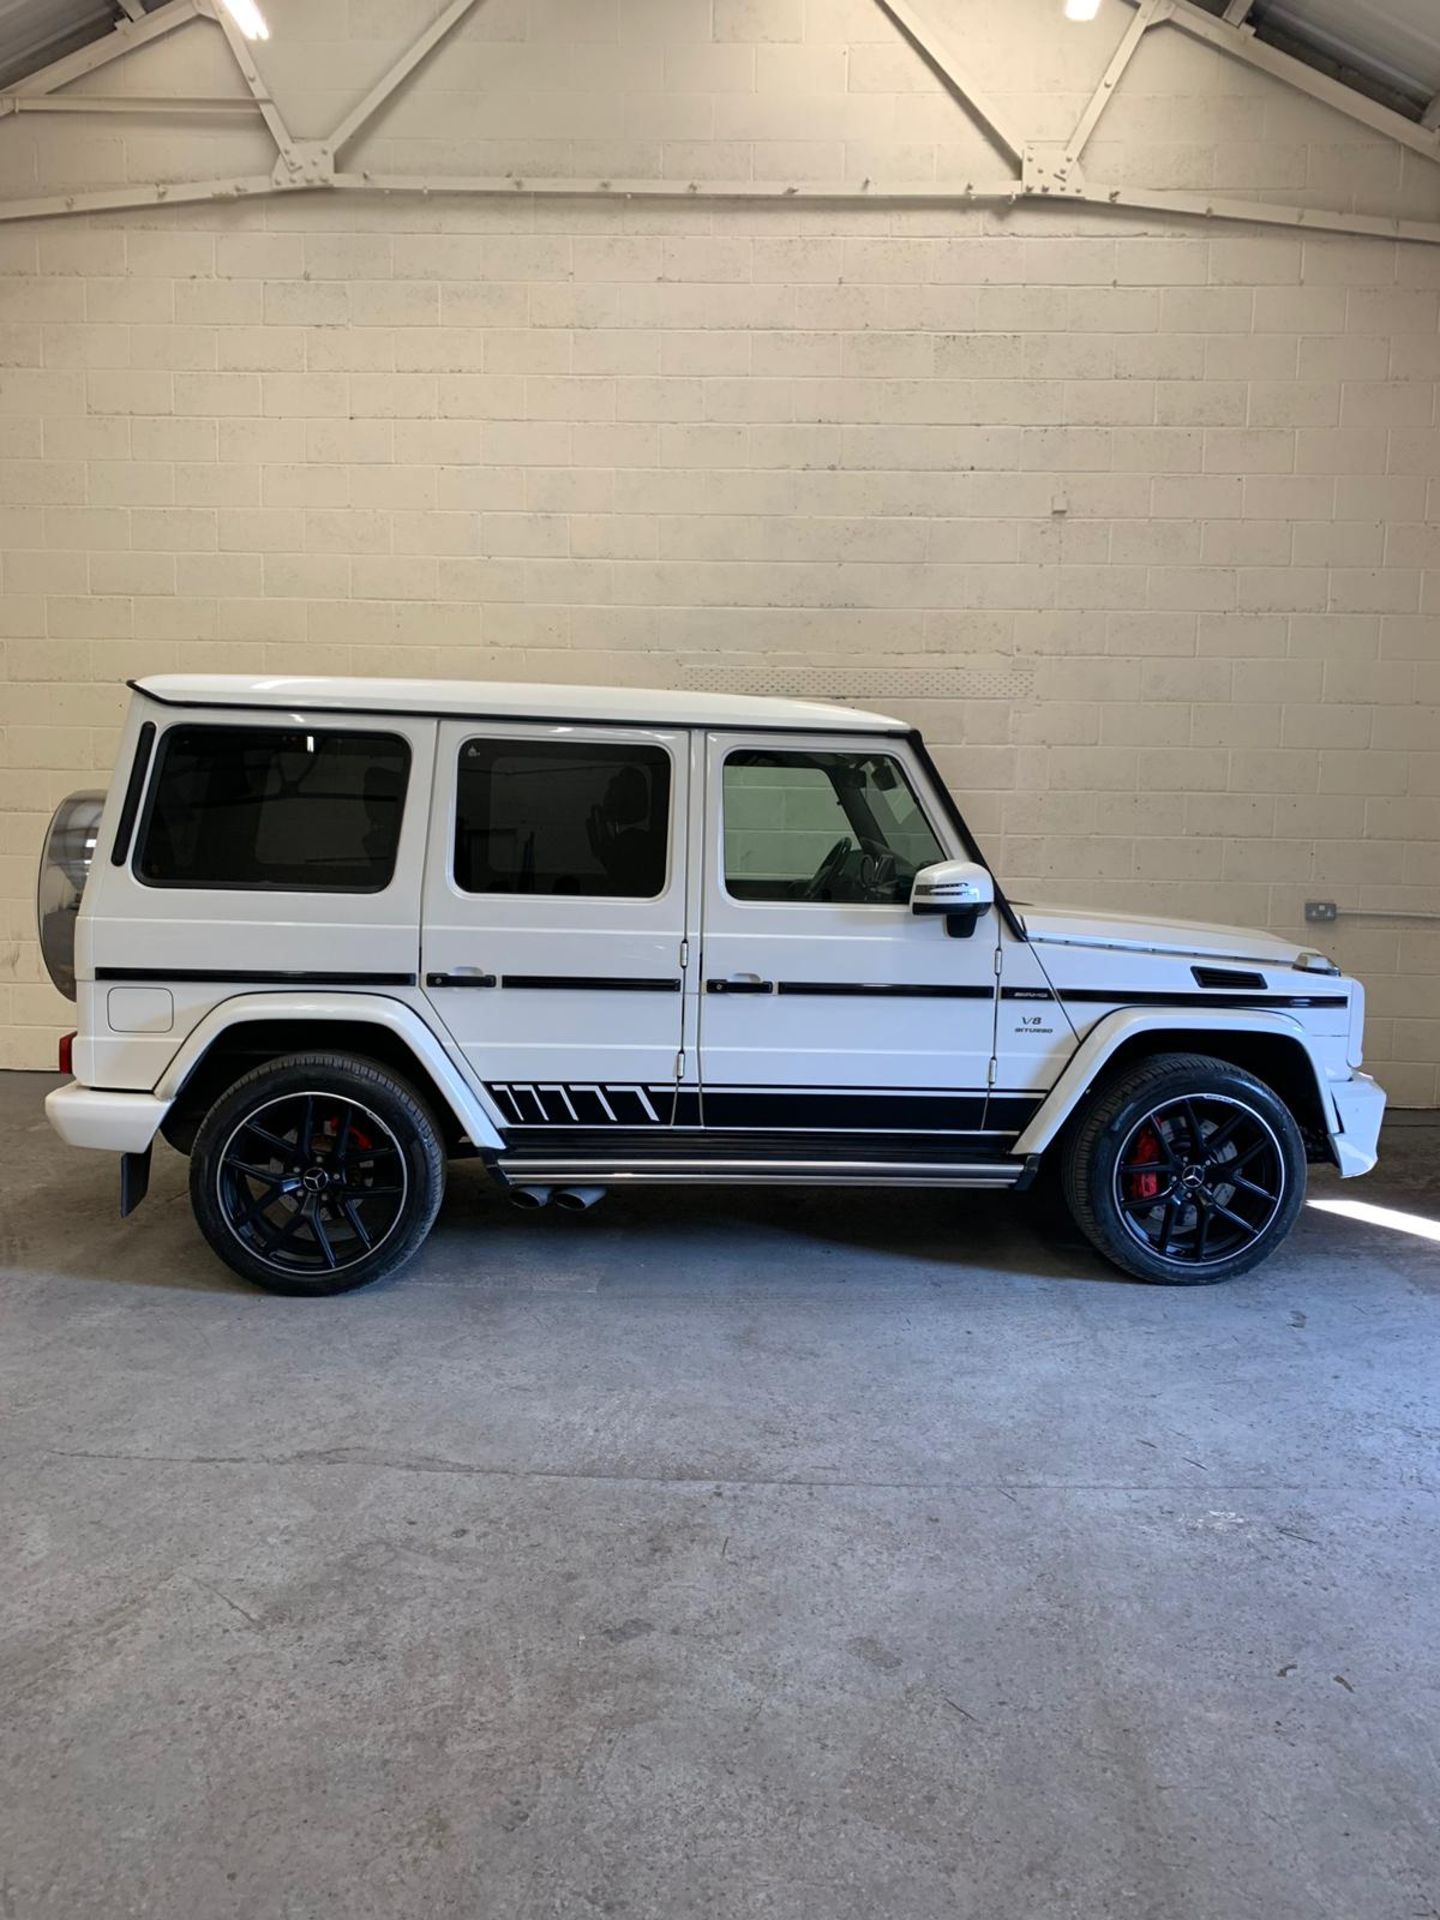 2014/63 REG MERCEDES-BENZ G63 AMG 5.5L AUTOMATIC, SHOWING 0 FORMER KEEPERS *NO VAT* - Image 5 of 15